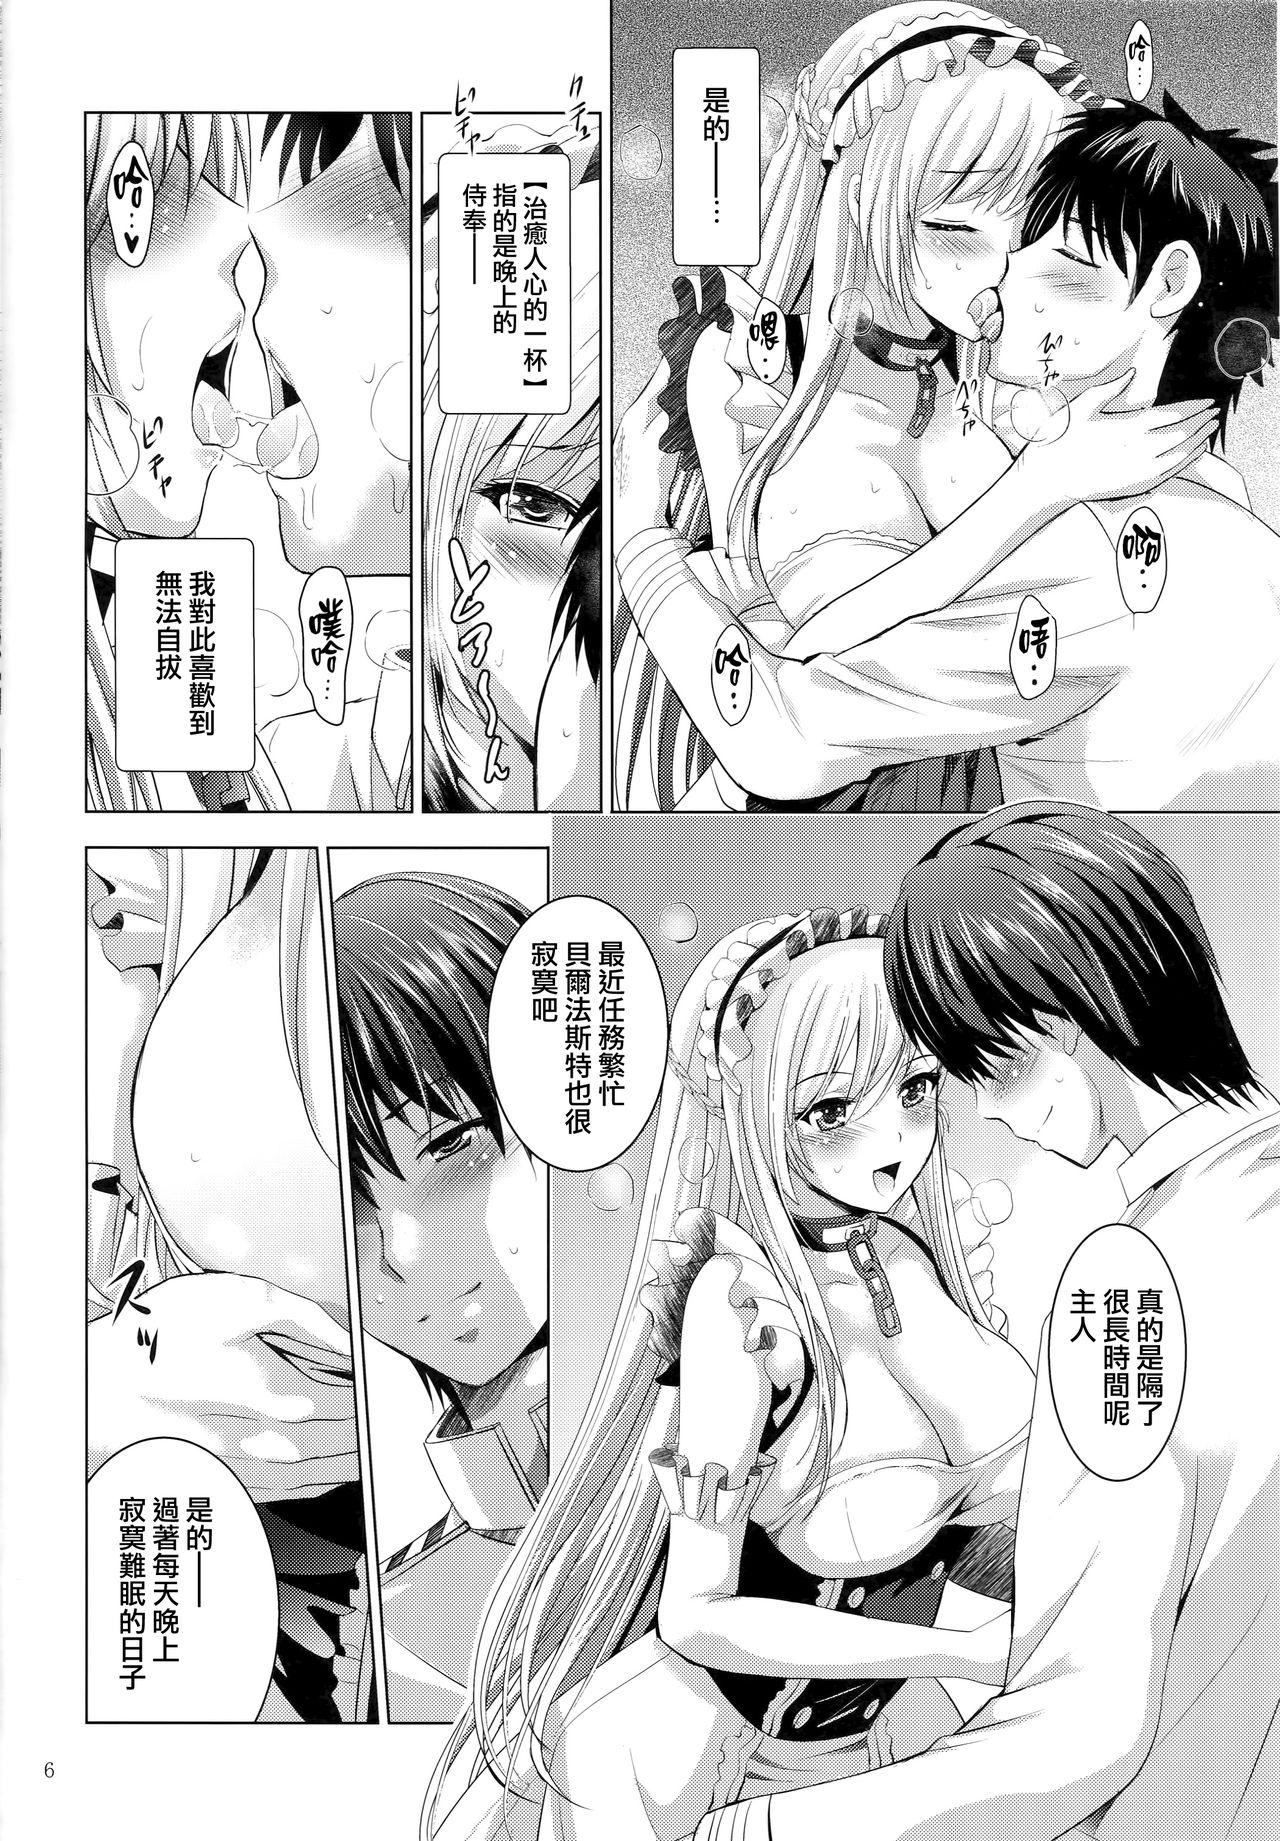 Groupsex MOUSOU THEATER 57 - Azur lane Gay Group - Page 6